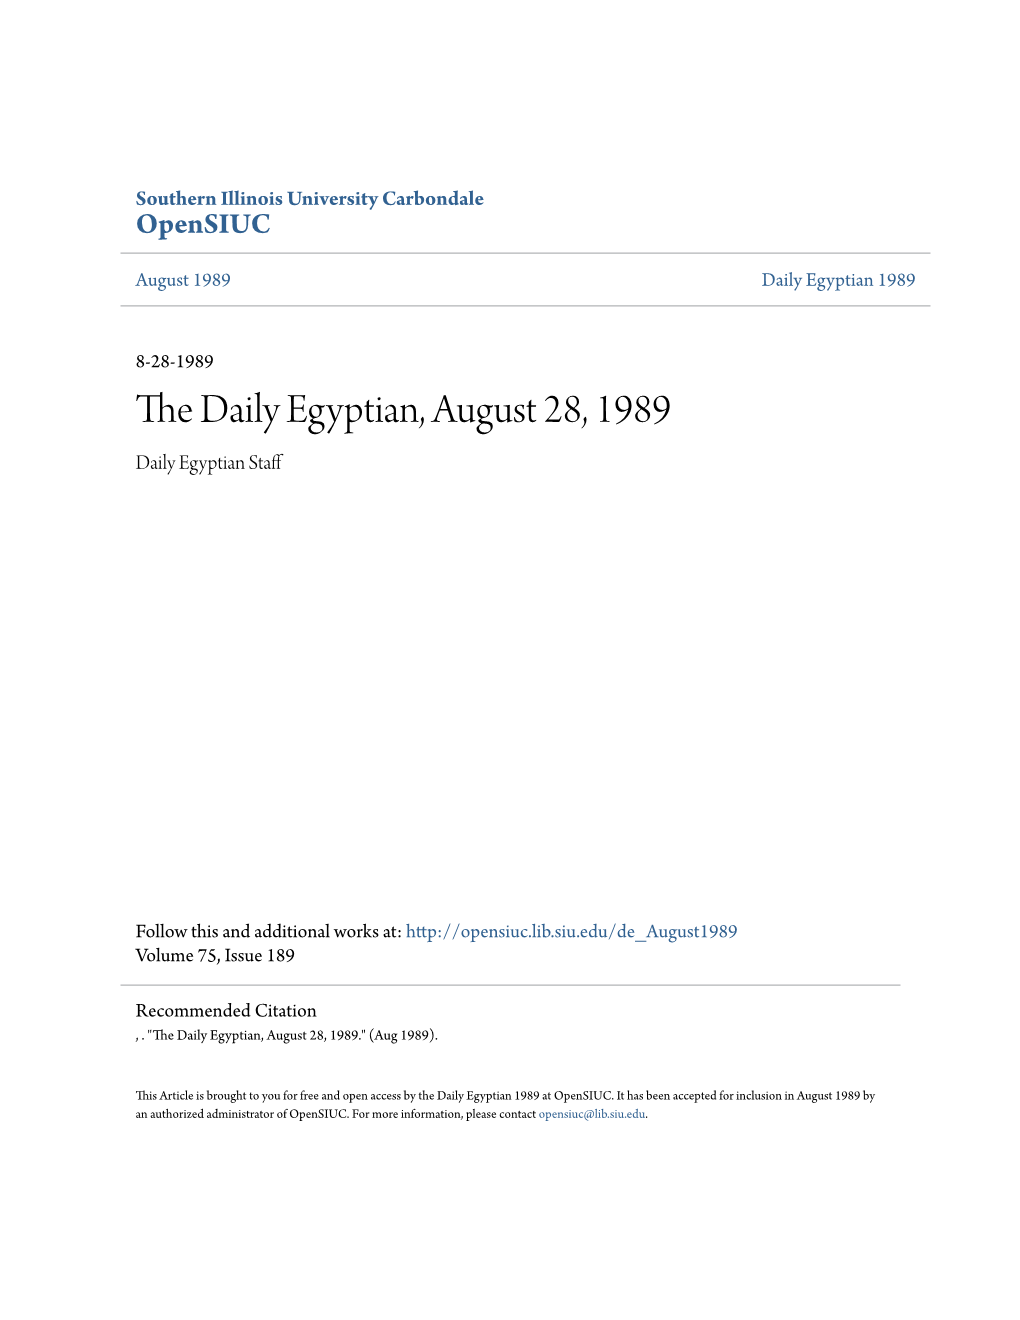 The Daily Egyptian, August 28, 1989